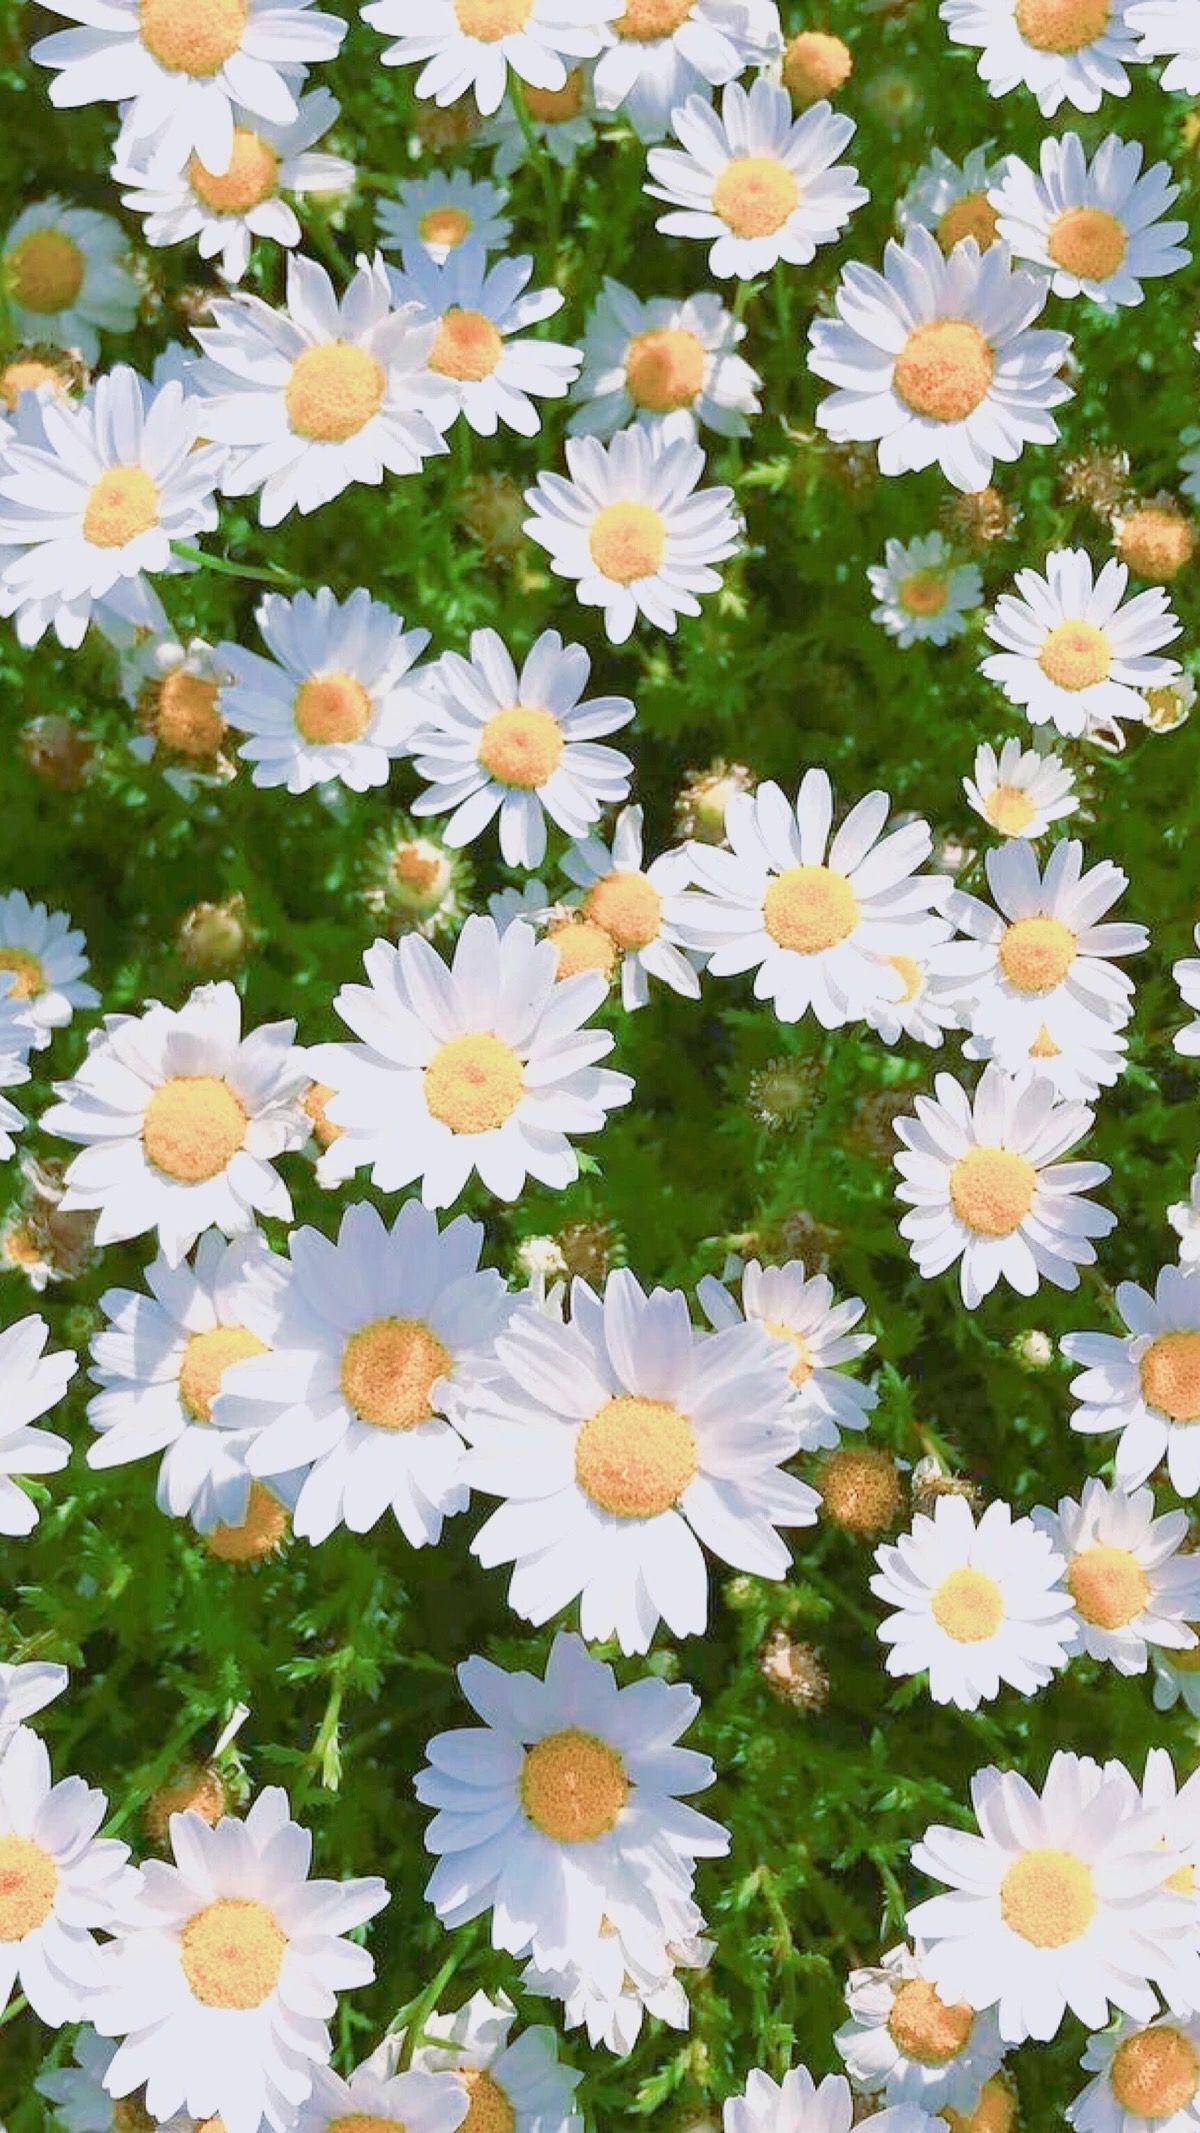 Daisy Aesthetic Wallpapers - Top Free Daisy Aesthetic Backgrounds